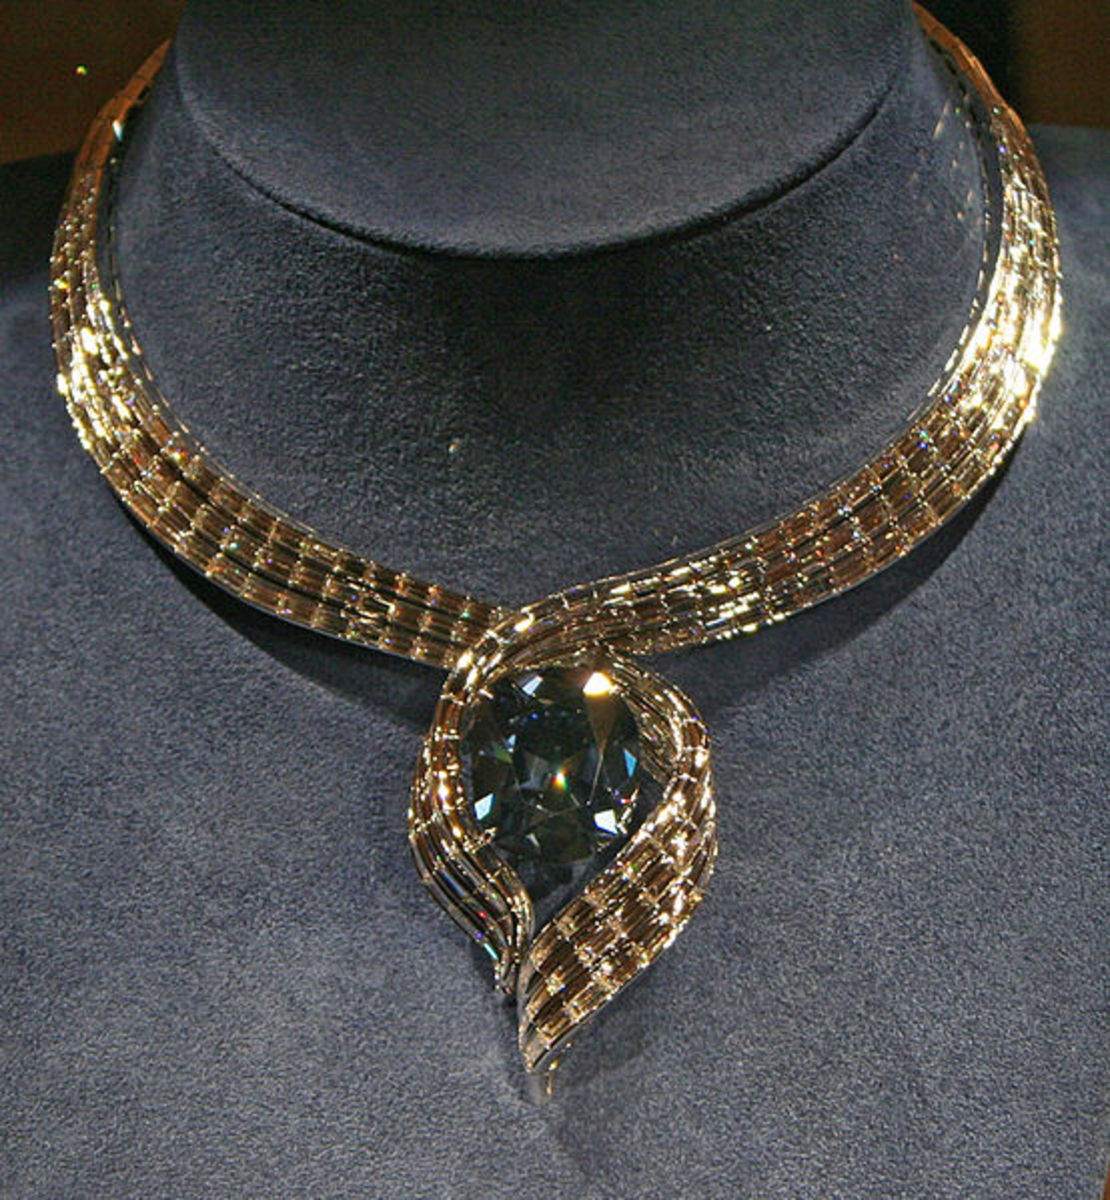 The Hope Diamond in its new setting